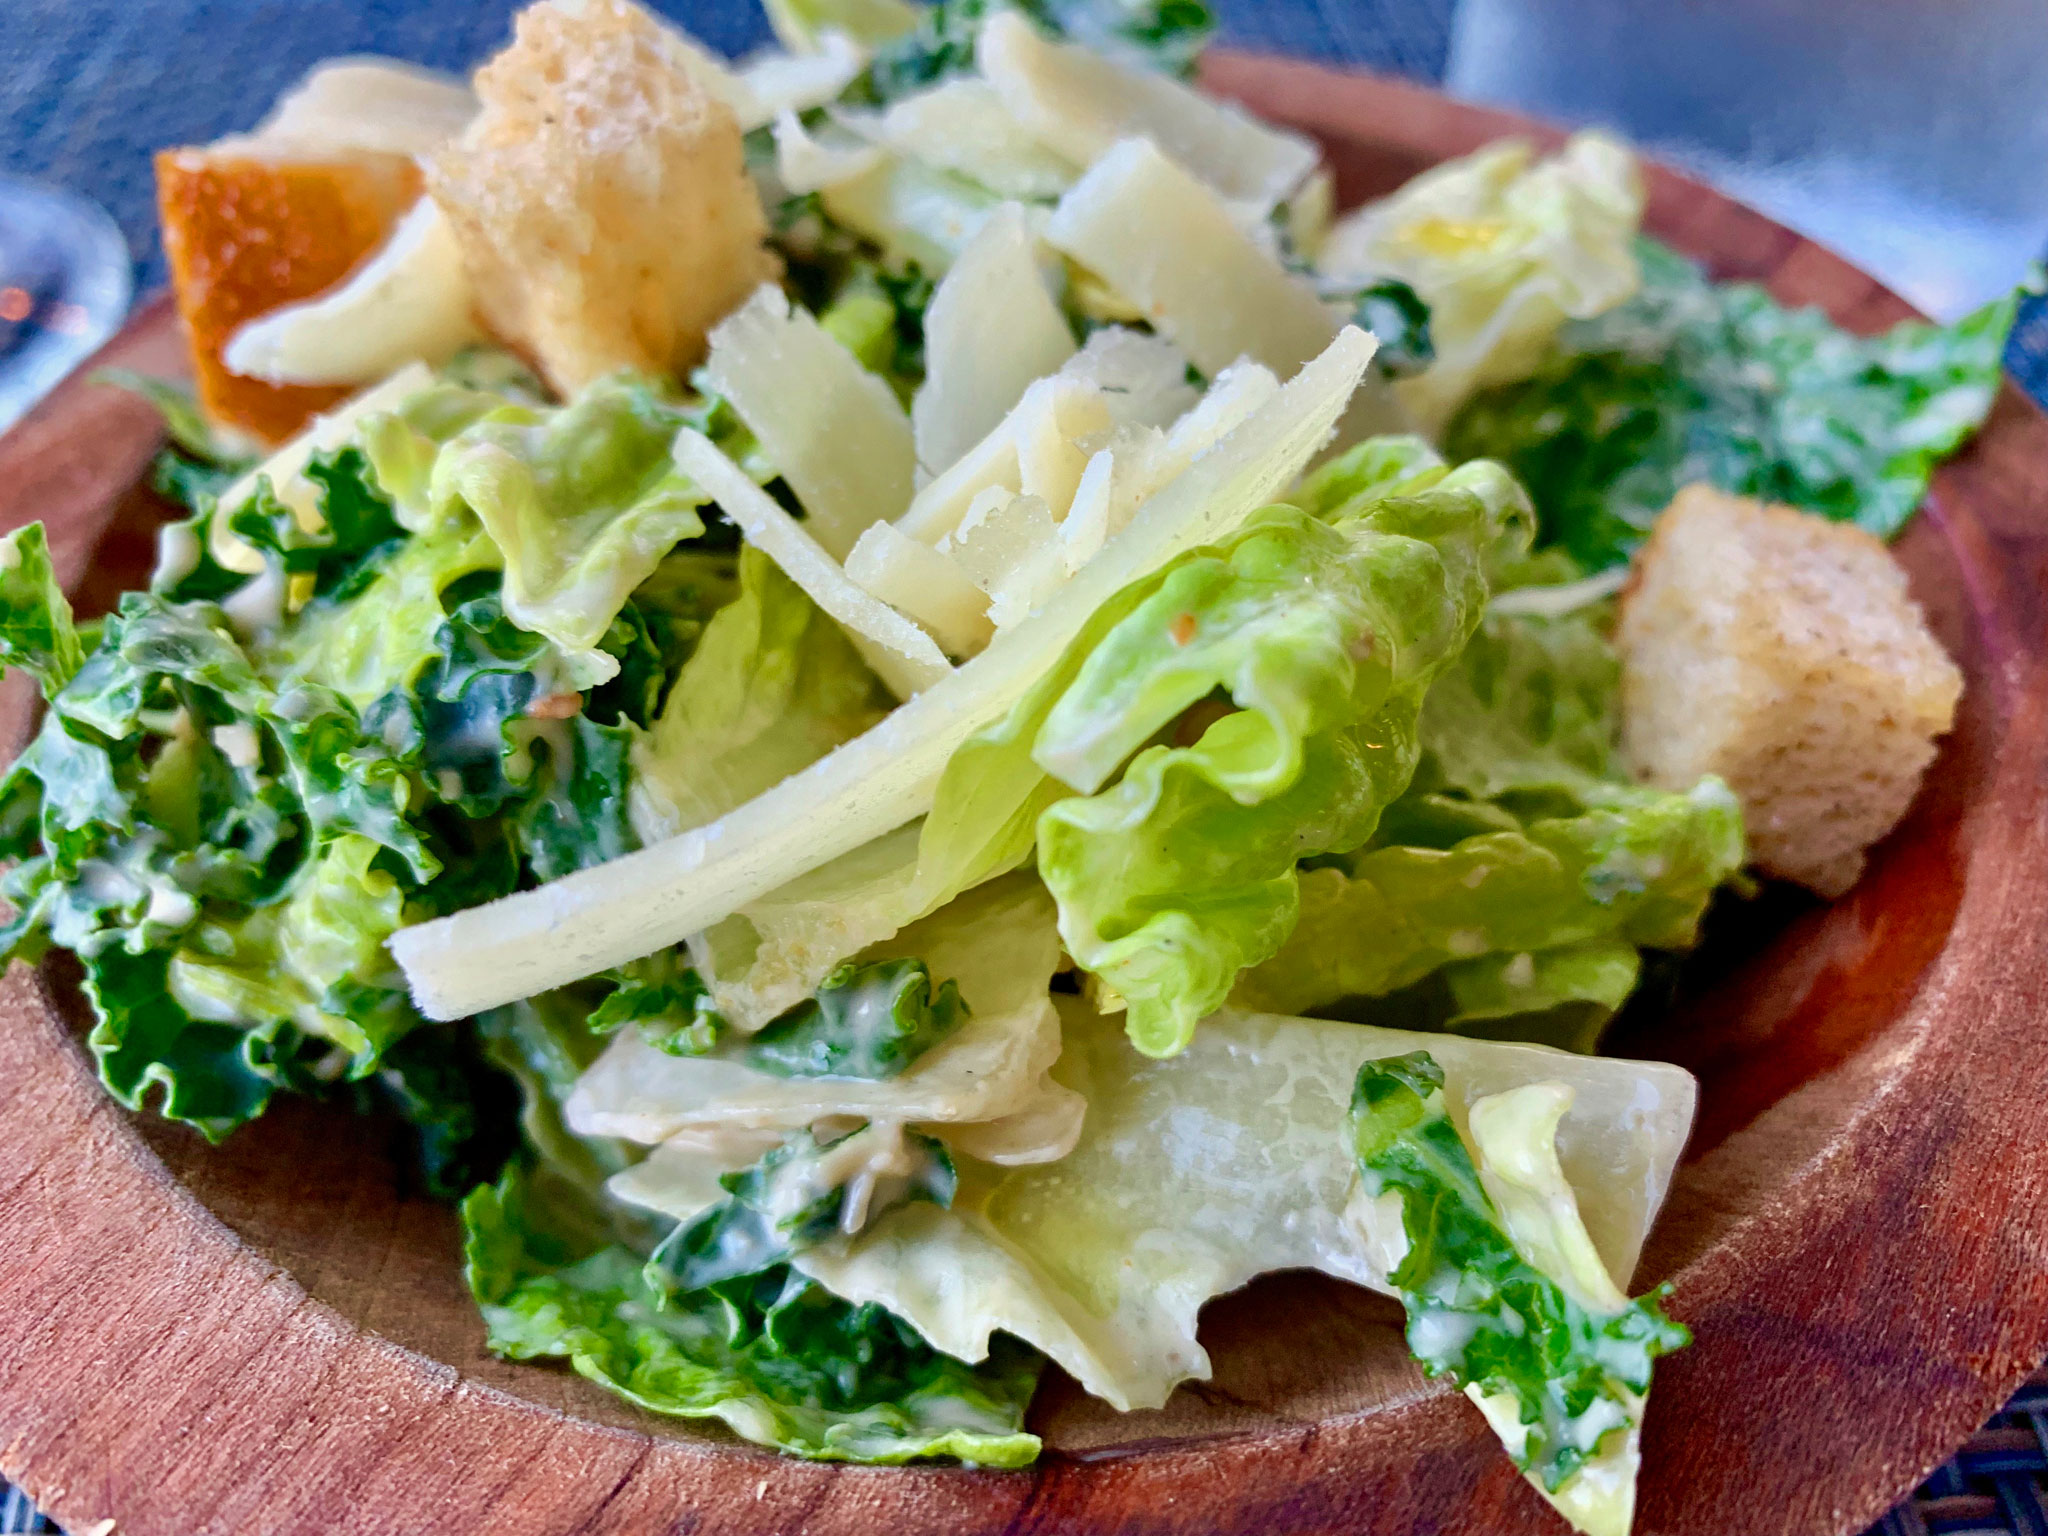 Stillwaters Caesar Salad with Kale and Romaine